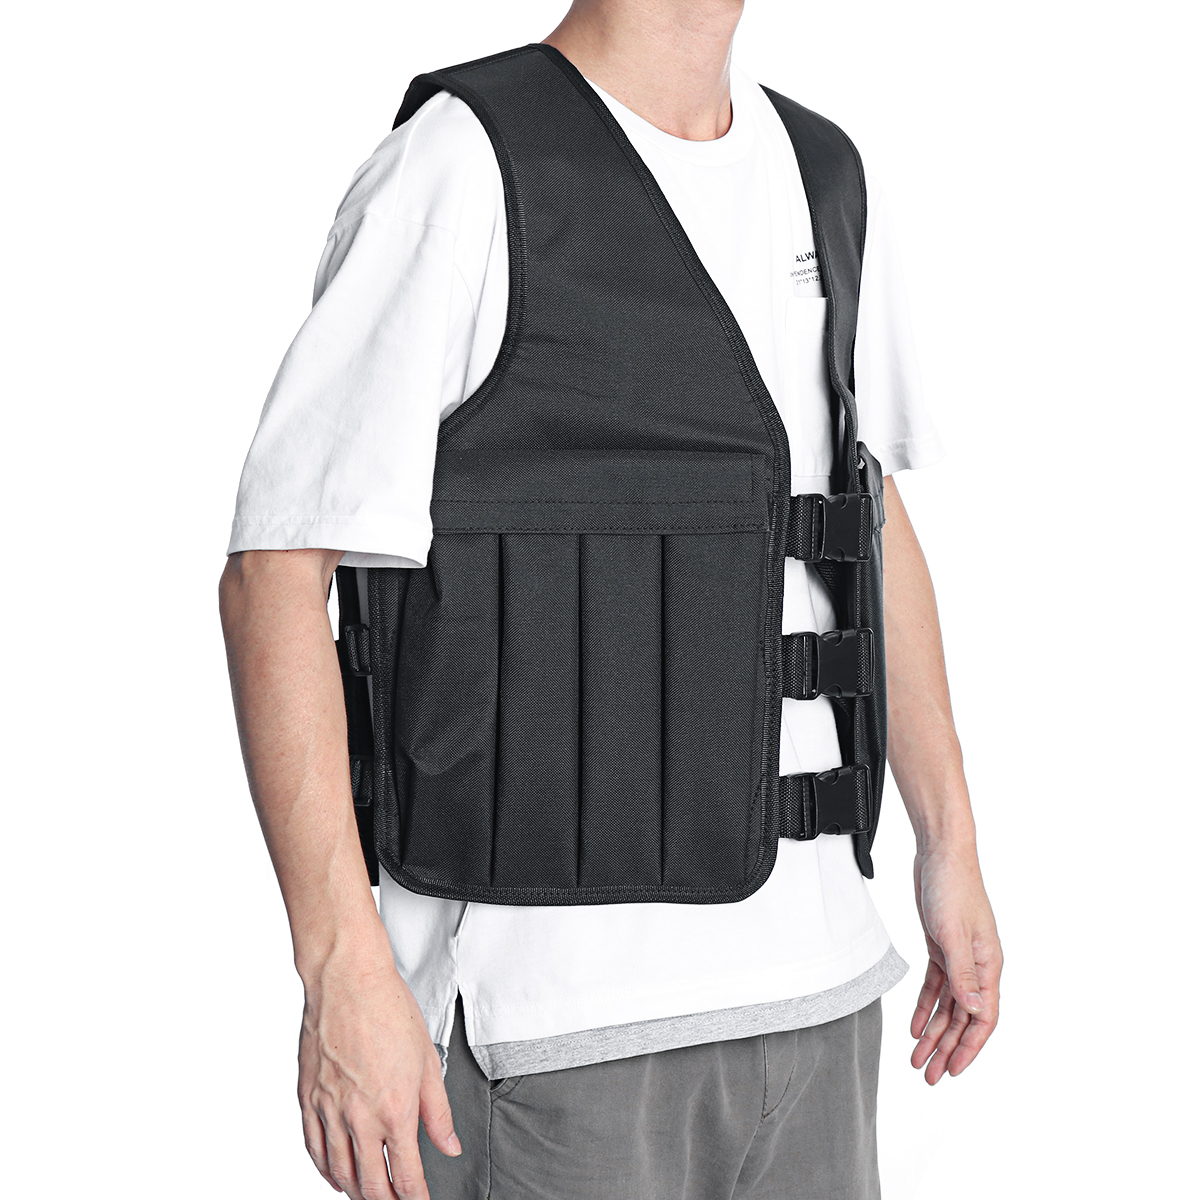 Adjustable-Weight-Vest-Running-Sports-Shaping-Slimming-Fitness-Weight-Bearing-Equipment-1695473-5